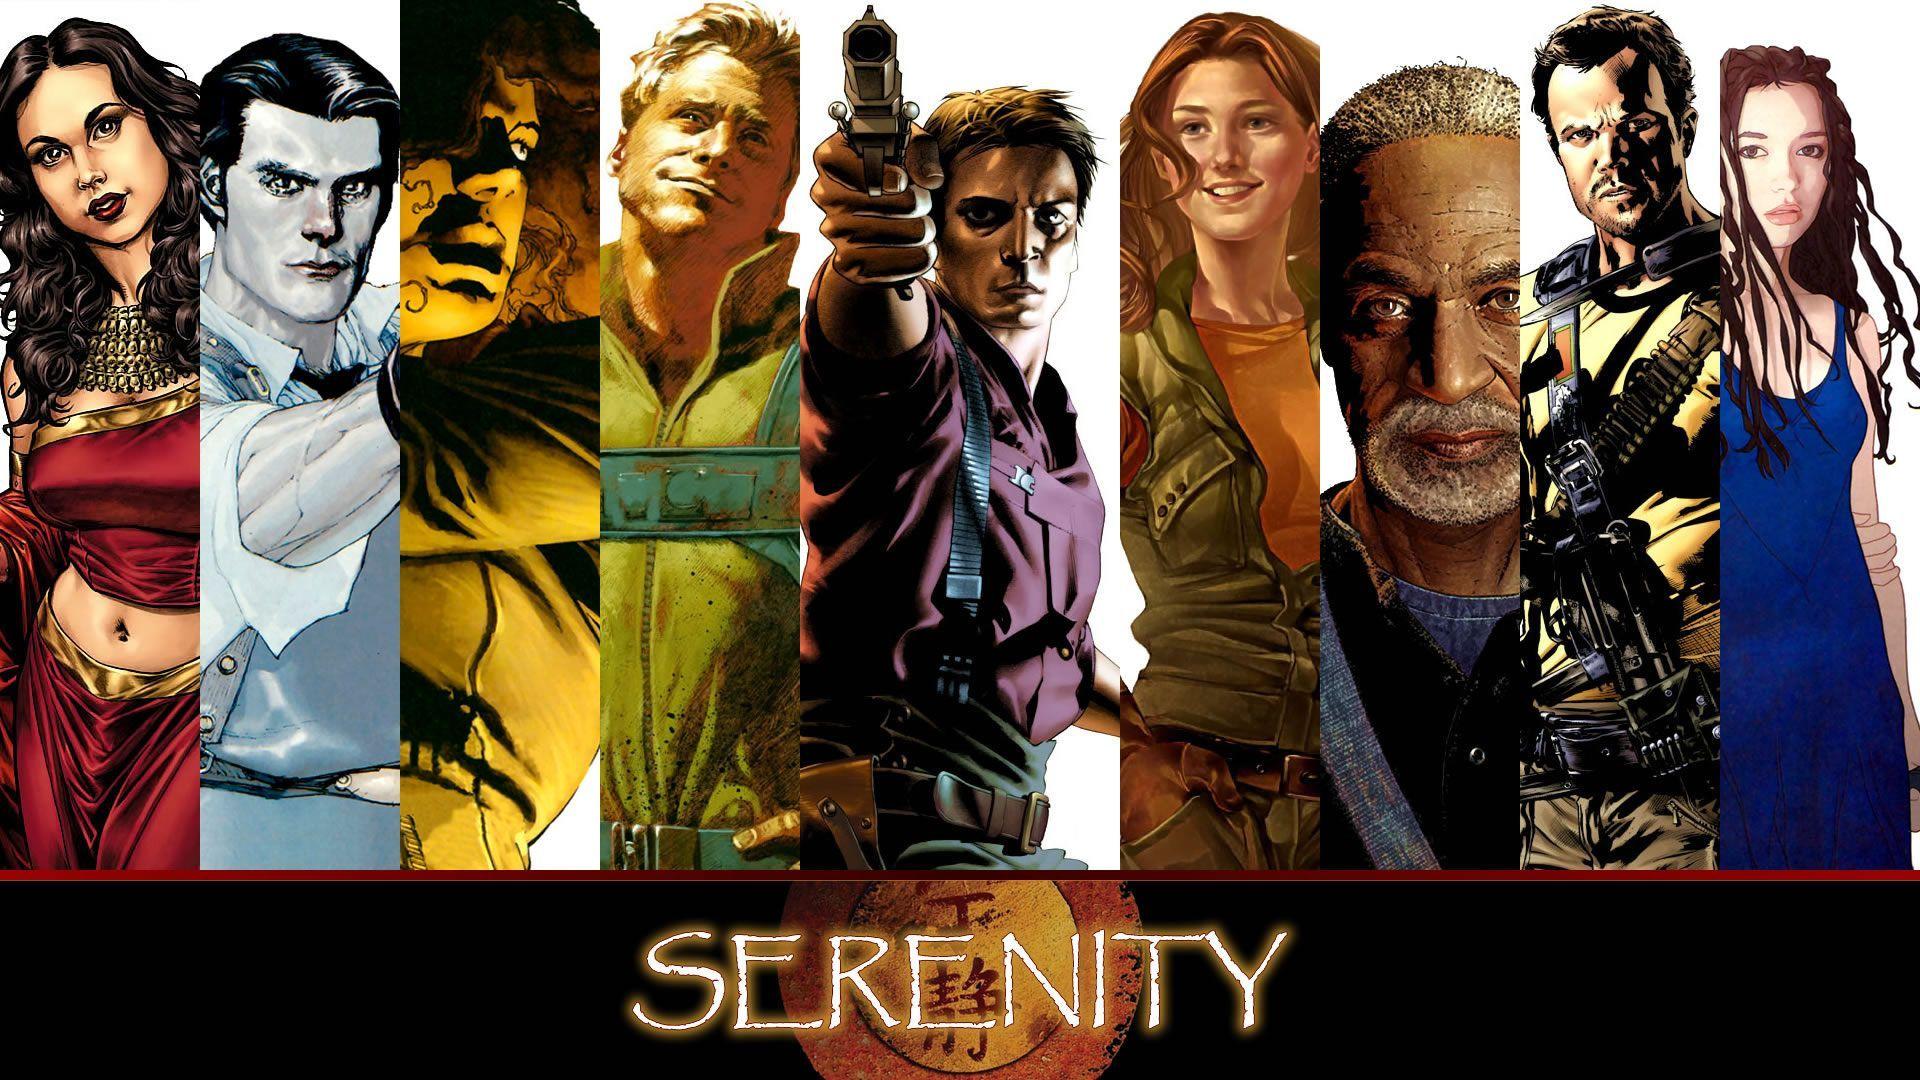 Awesome Firefly wallpapers collage using the comics : wallpapers